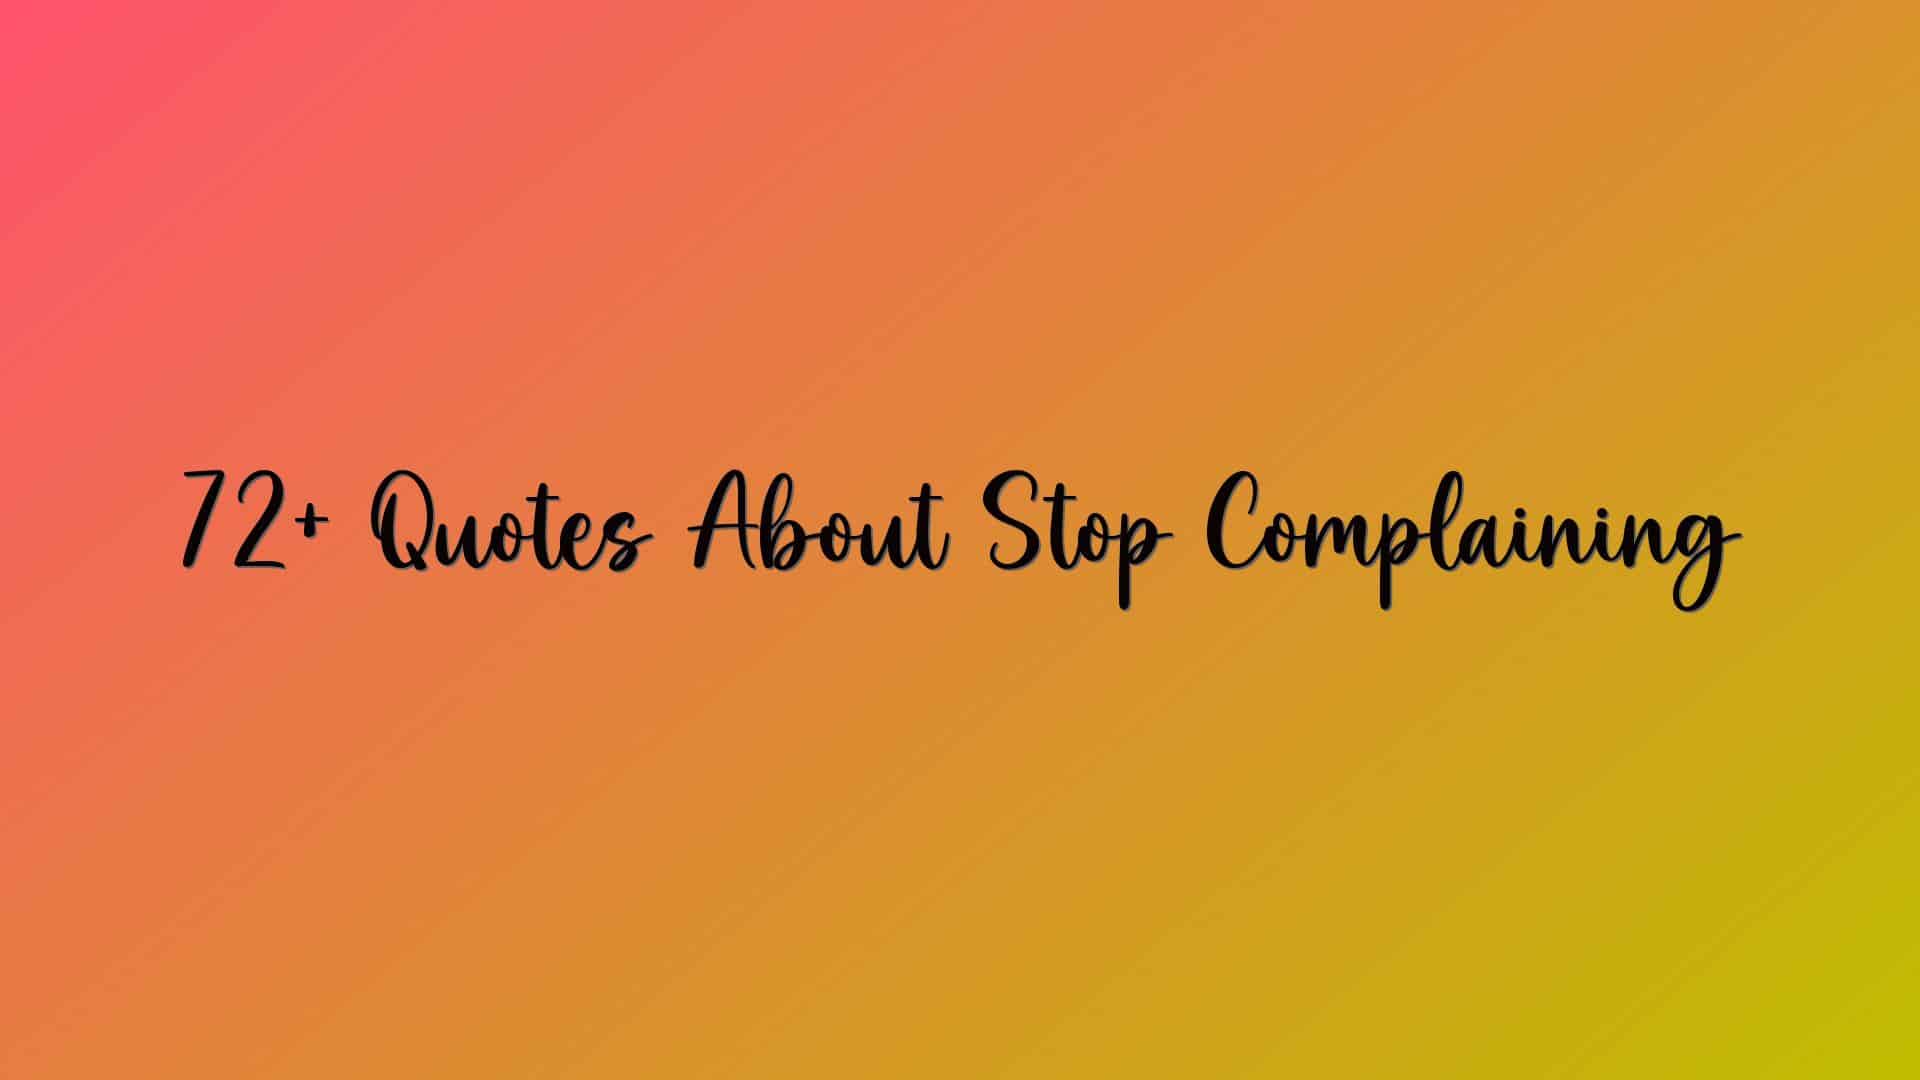 72+ Quotes About Stop Complaining